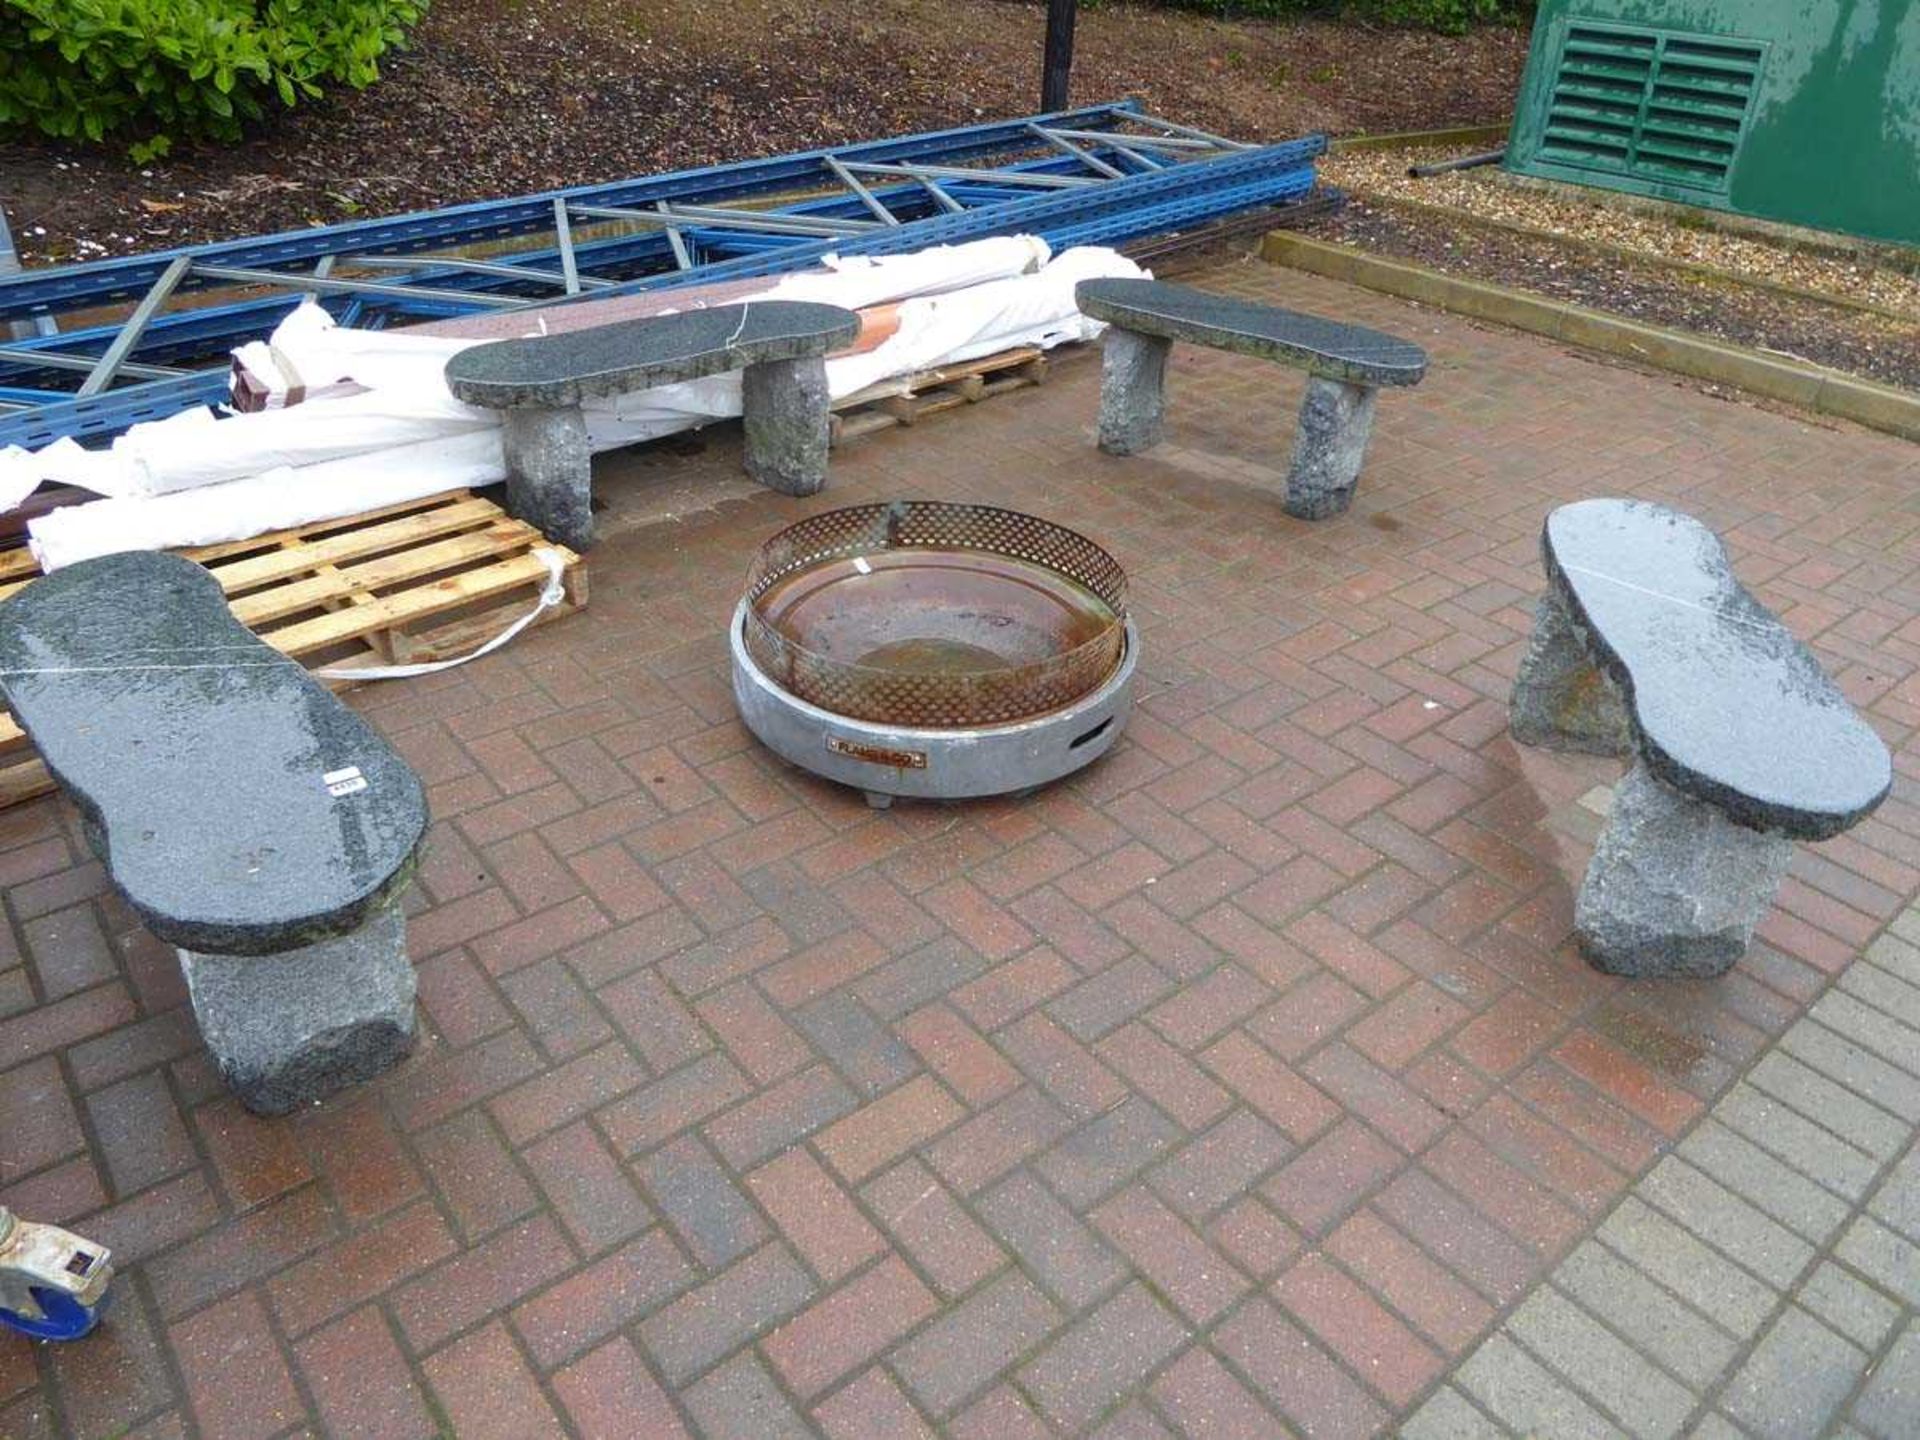 4 large granite style benches and a fire pit